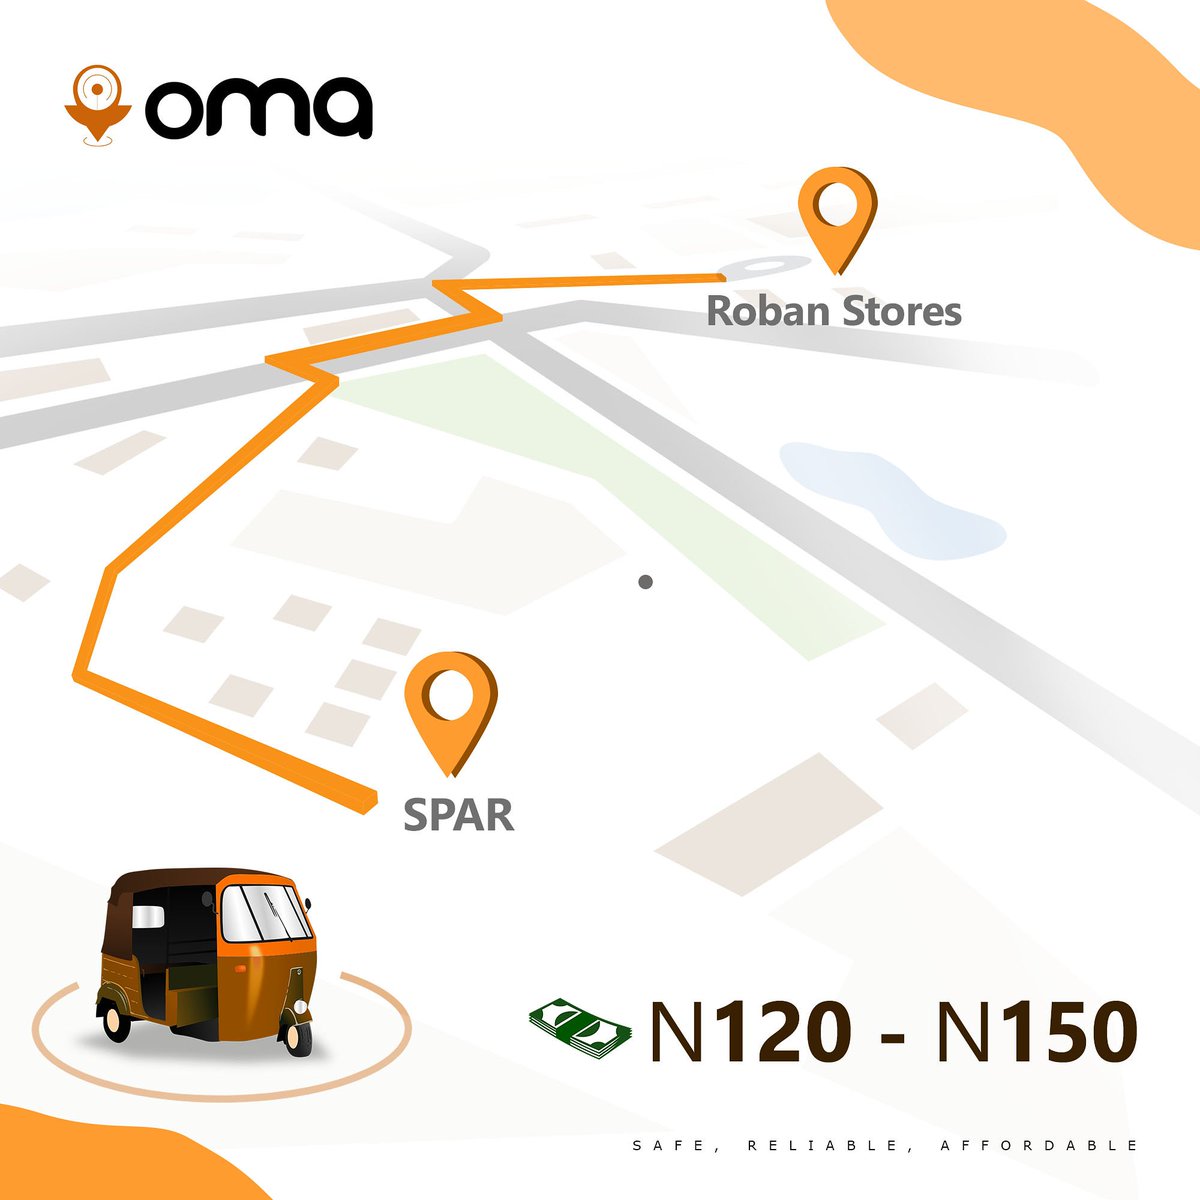 The only way you should be moving if you want comfortable, convenient and reliable rides at a reduced price
.
#Oma #omakeke
#affordablerides #ridewithomaarriveinstyle